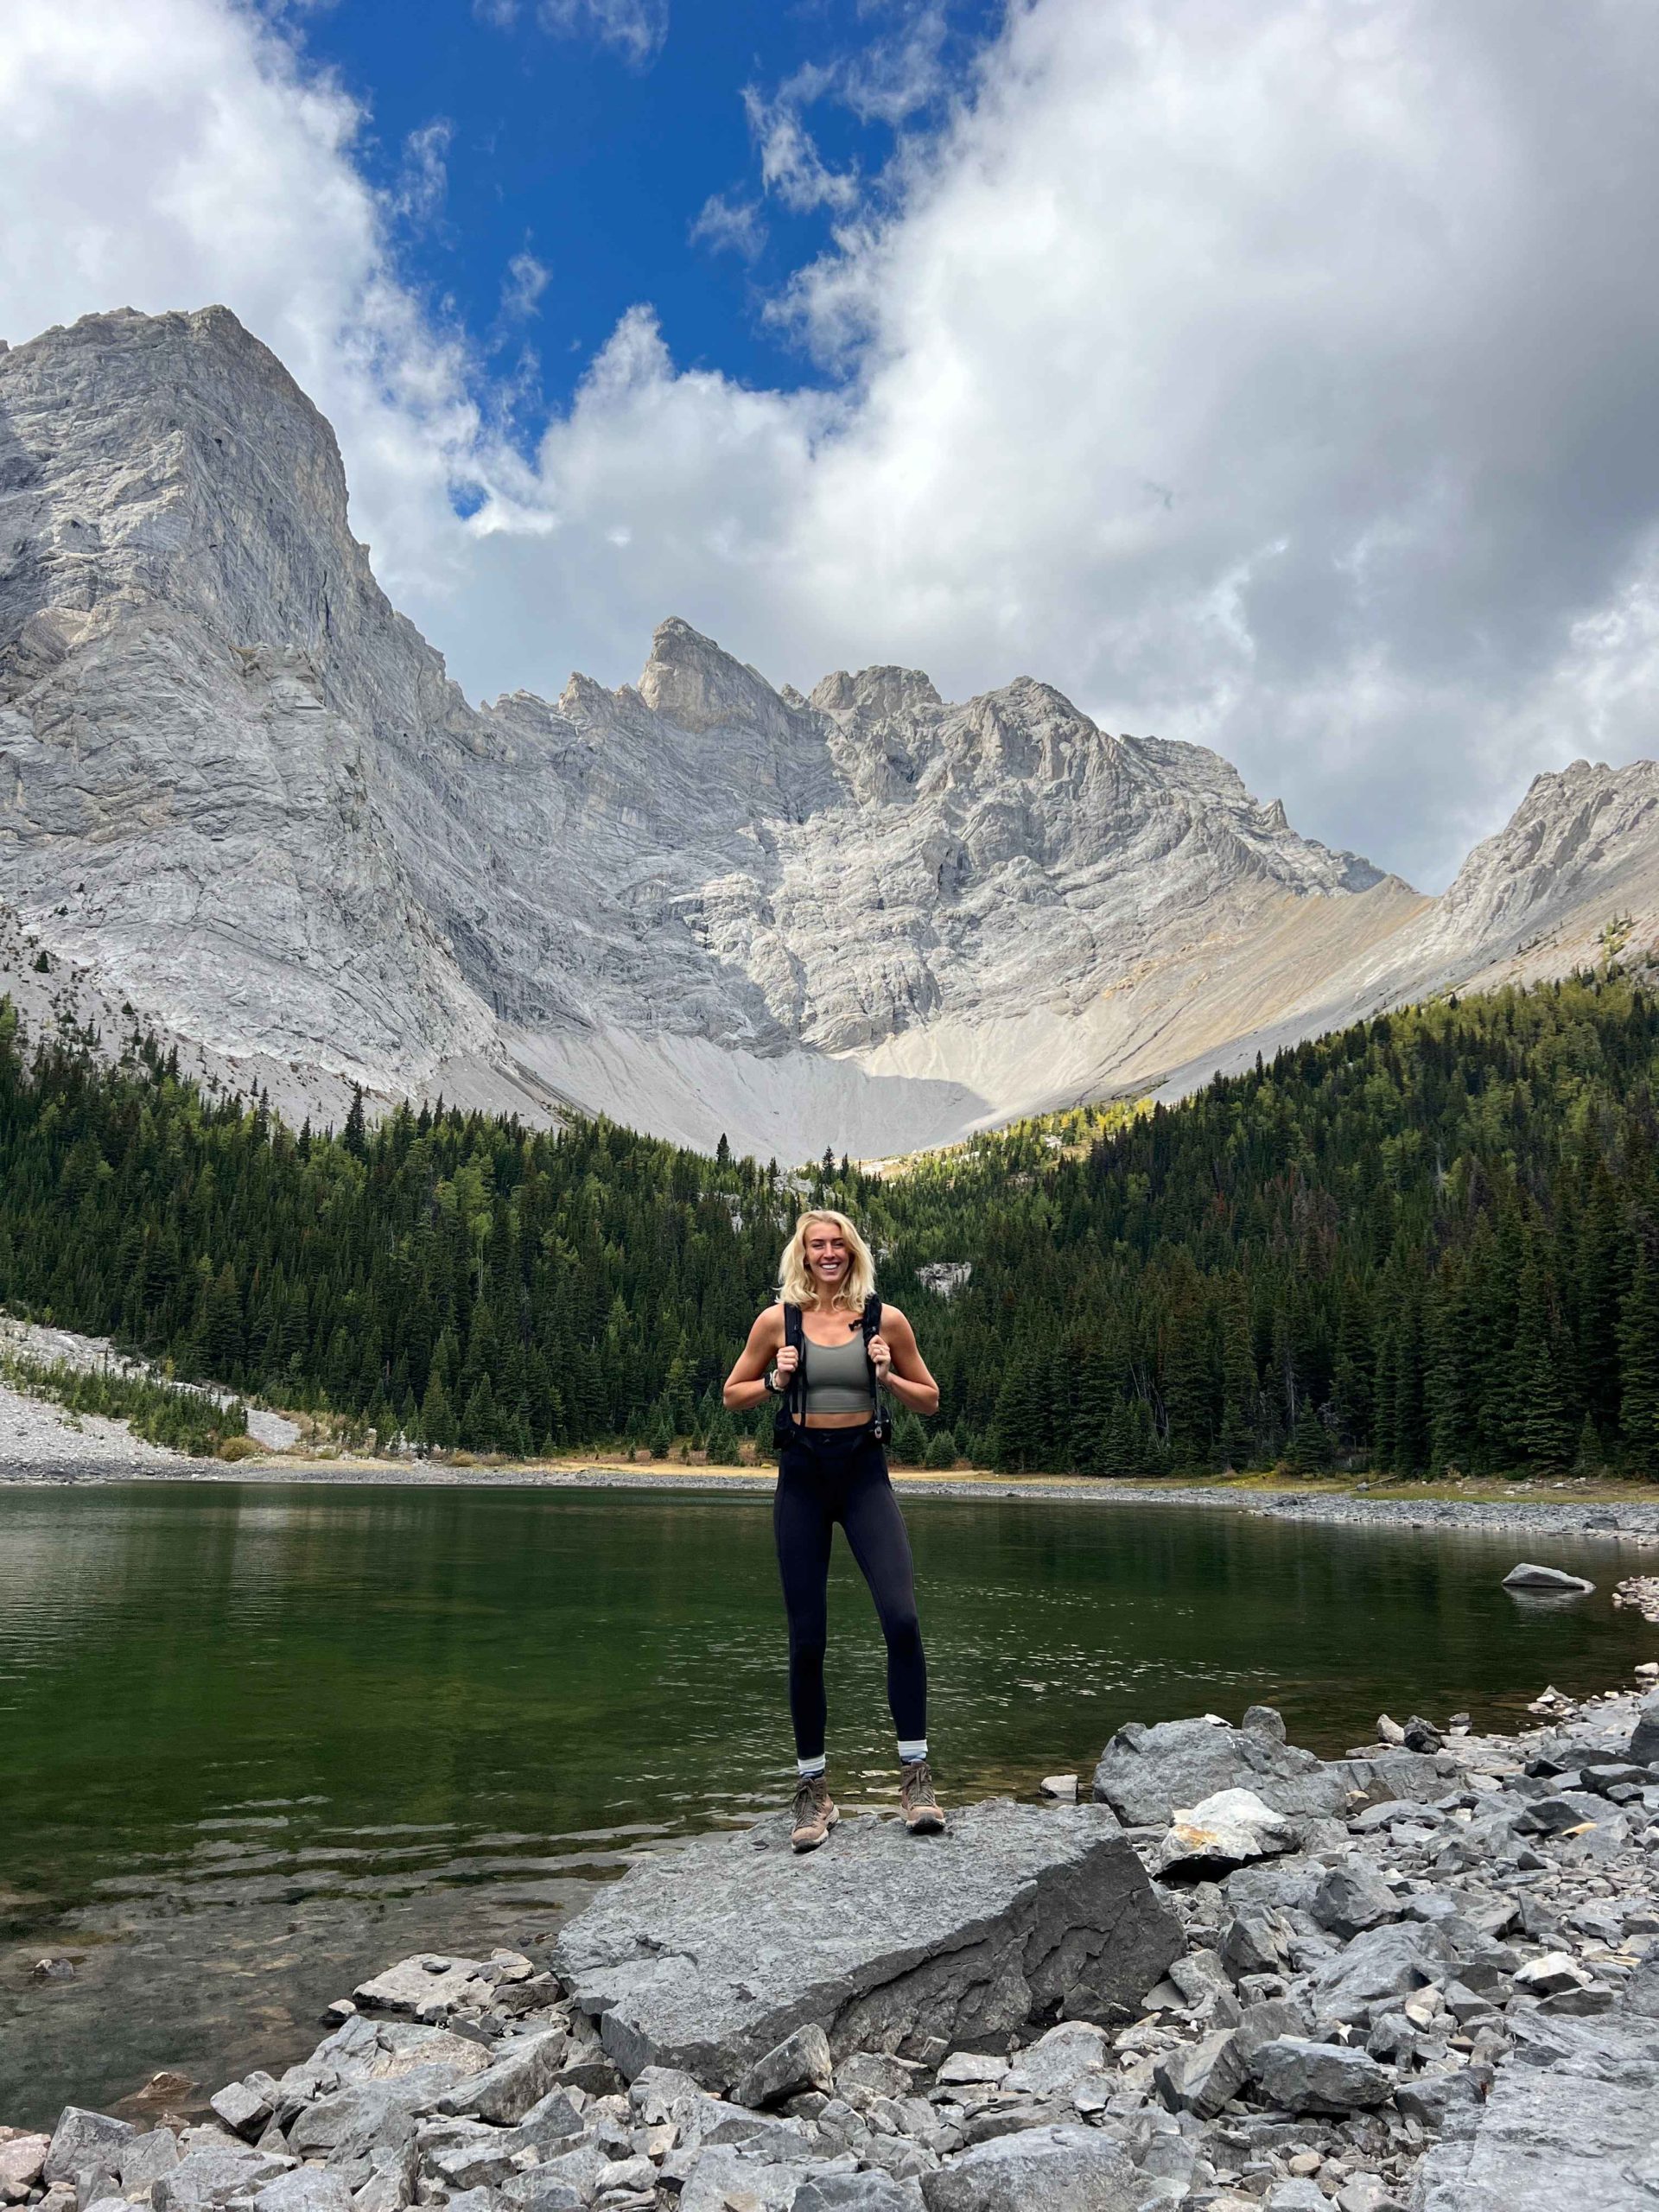 Zanna van Dijk stands in front of Tombstone Lakes in Kananaskis, Canada - Canada Road Trip Itinerary